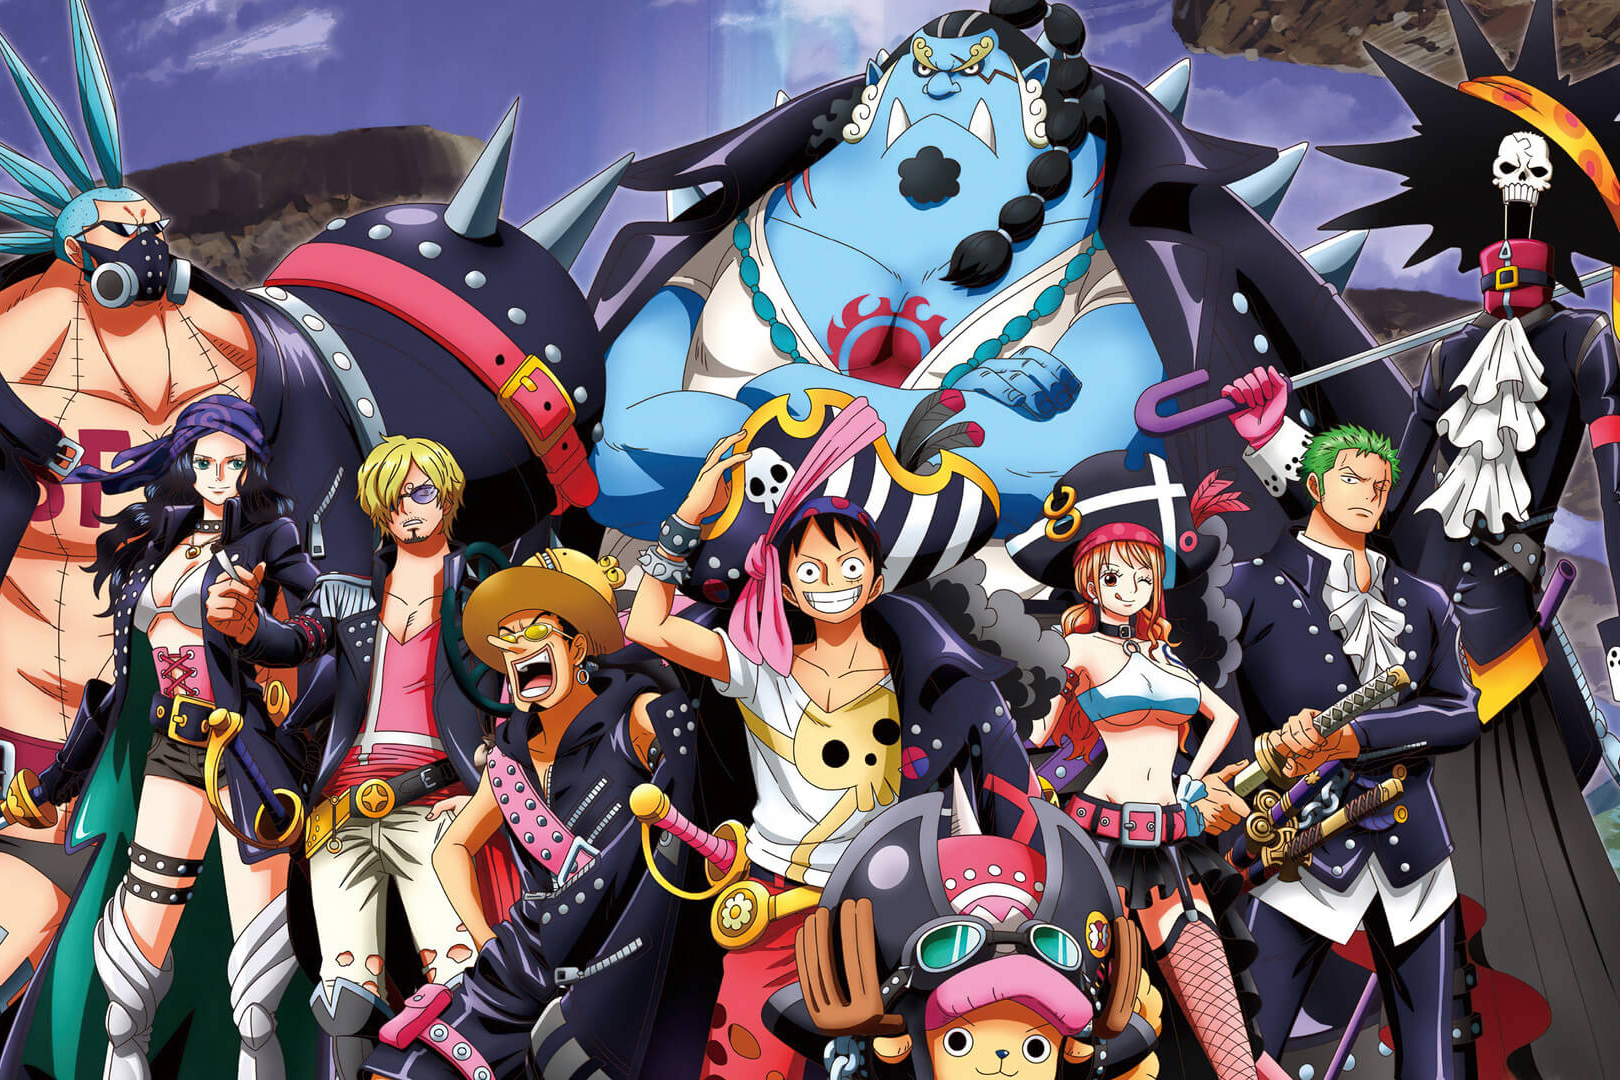 <br />
<b>Notice</b>:  Undefined index: title in <b>/www/wwwroot/onepiecethai.com/components/hero.php</b> on line <b>31</b><br />
